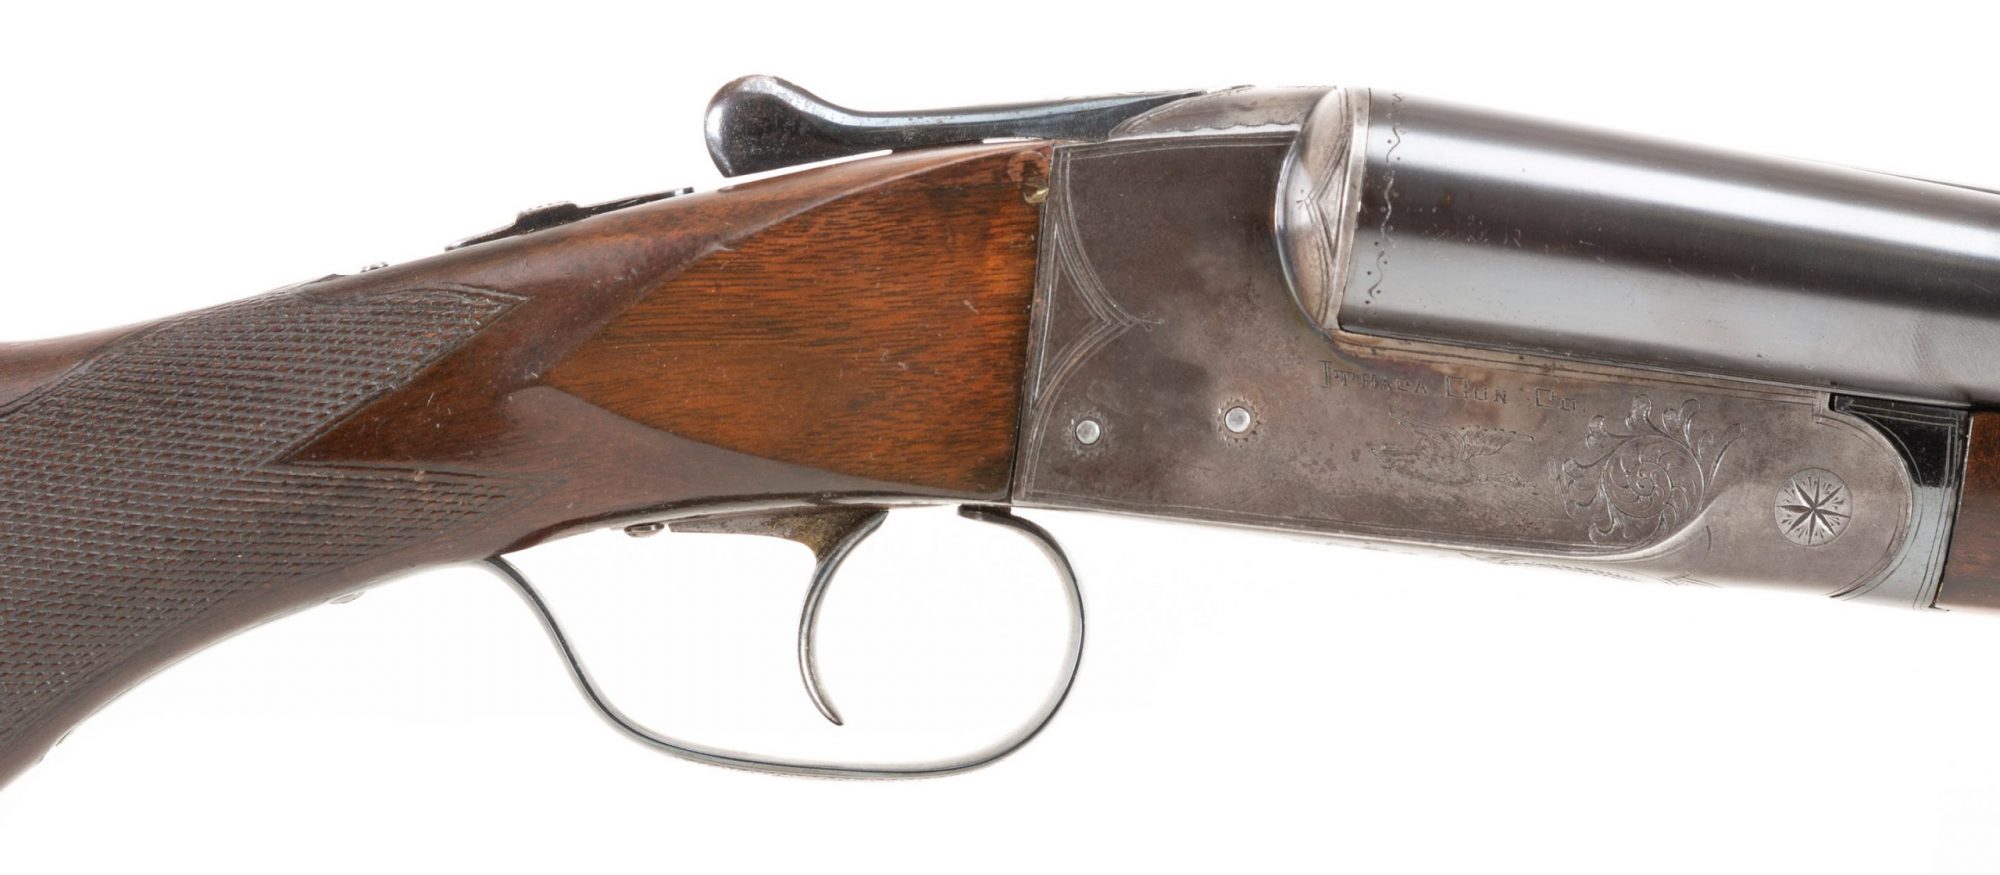 Photo of pre-owned Ithaca Double 12 gauge shotgun, sold as-is by Turnbull Restoration